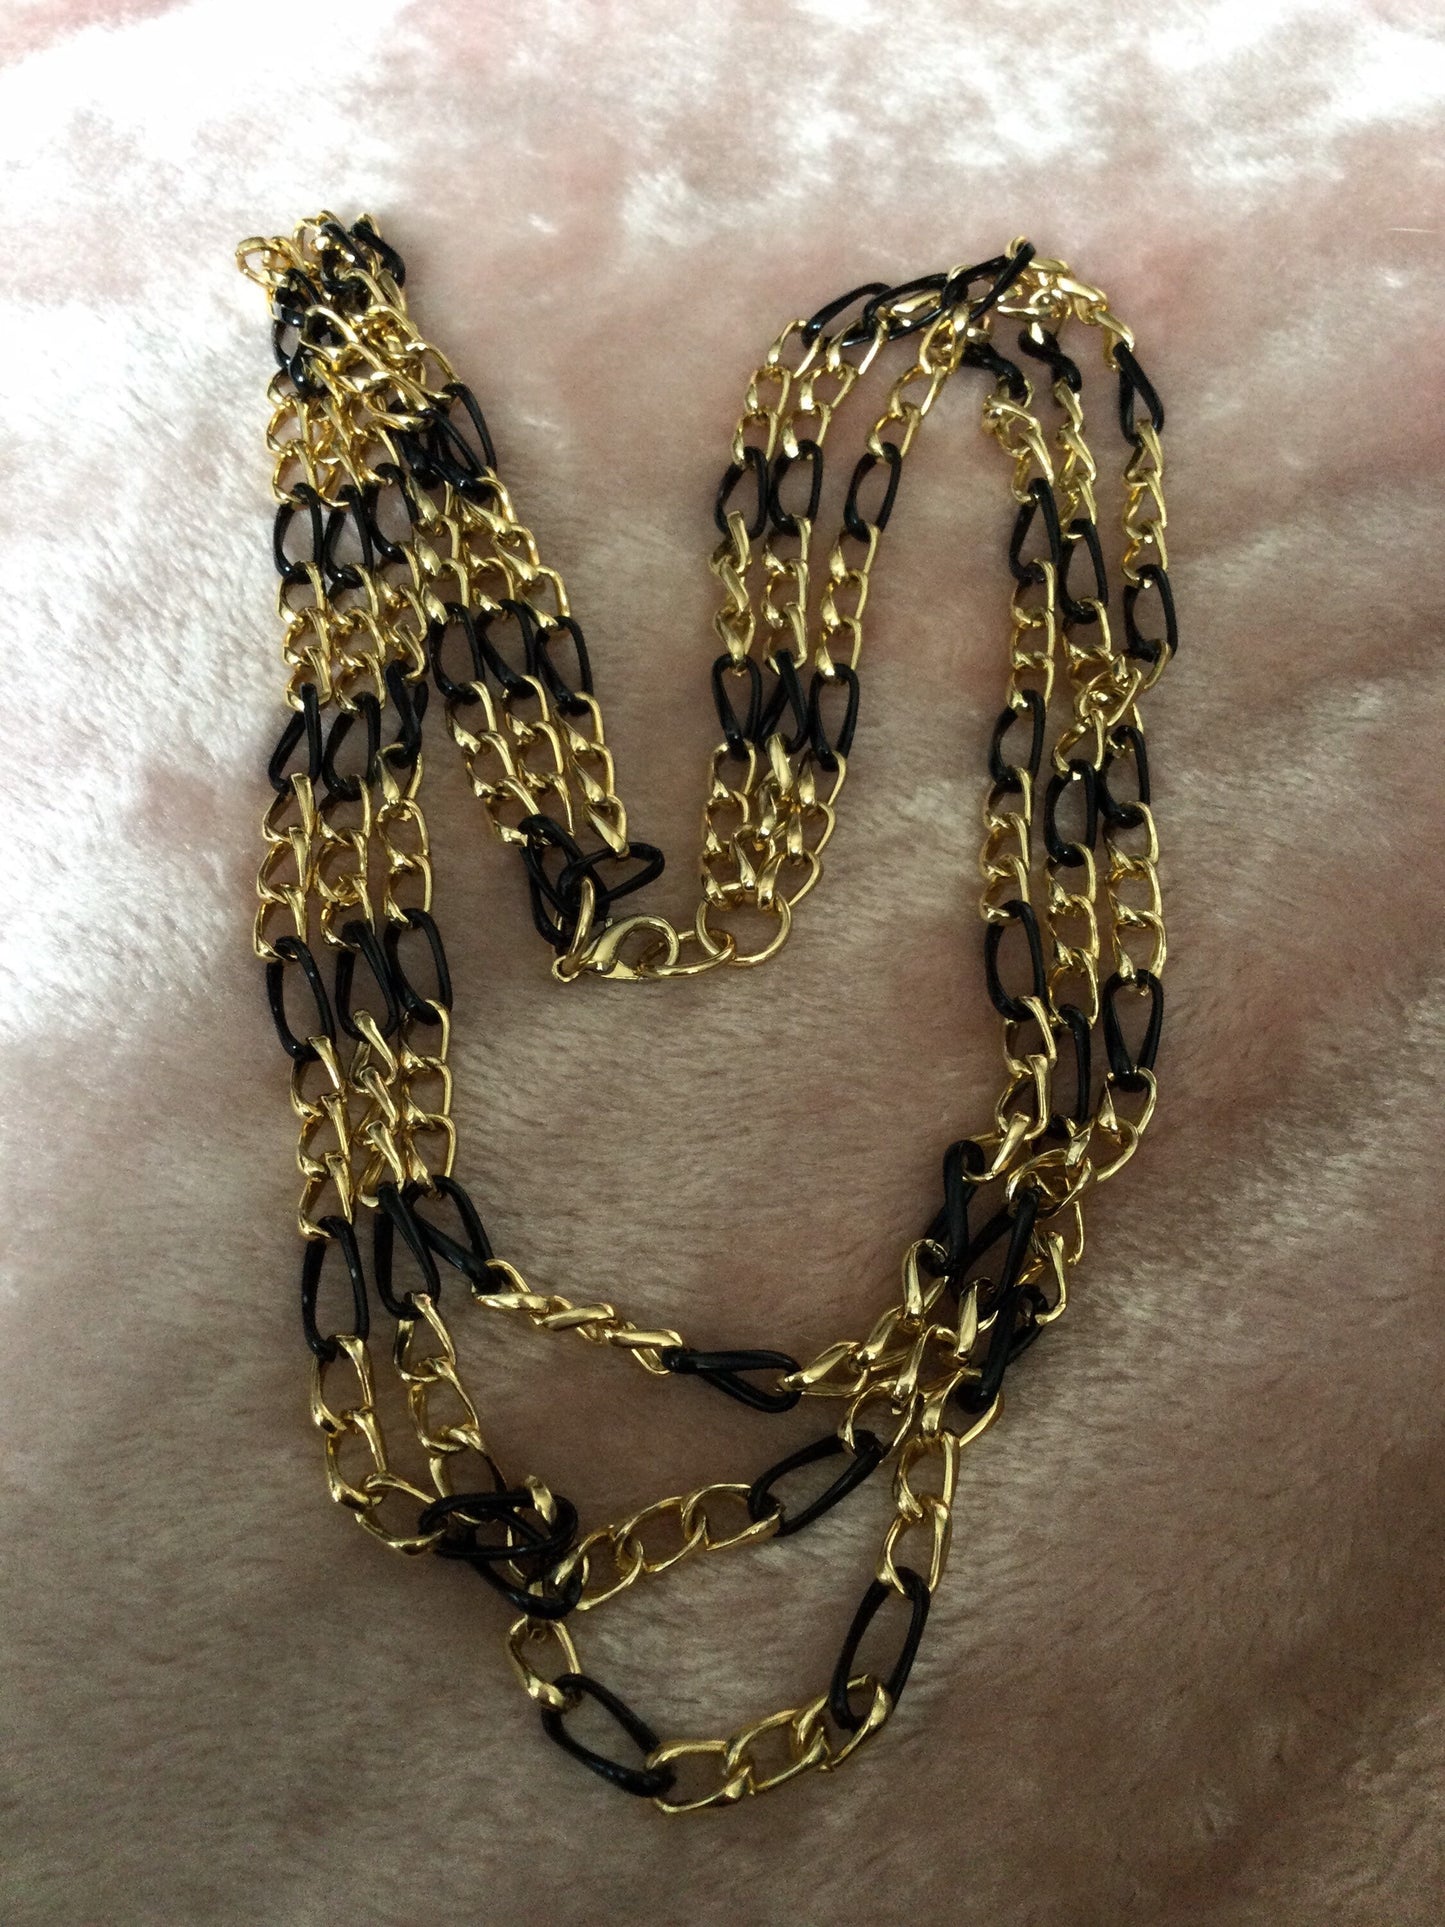 Vintage lightweight gold tone and black 3 strand necklace chain bib necklace